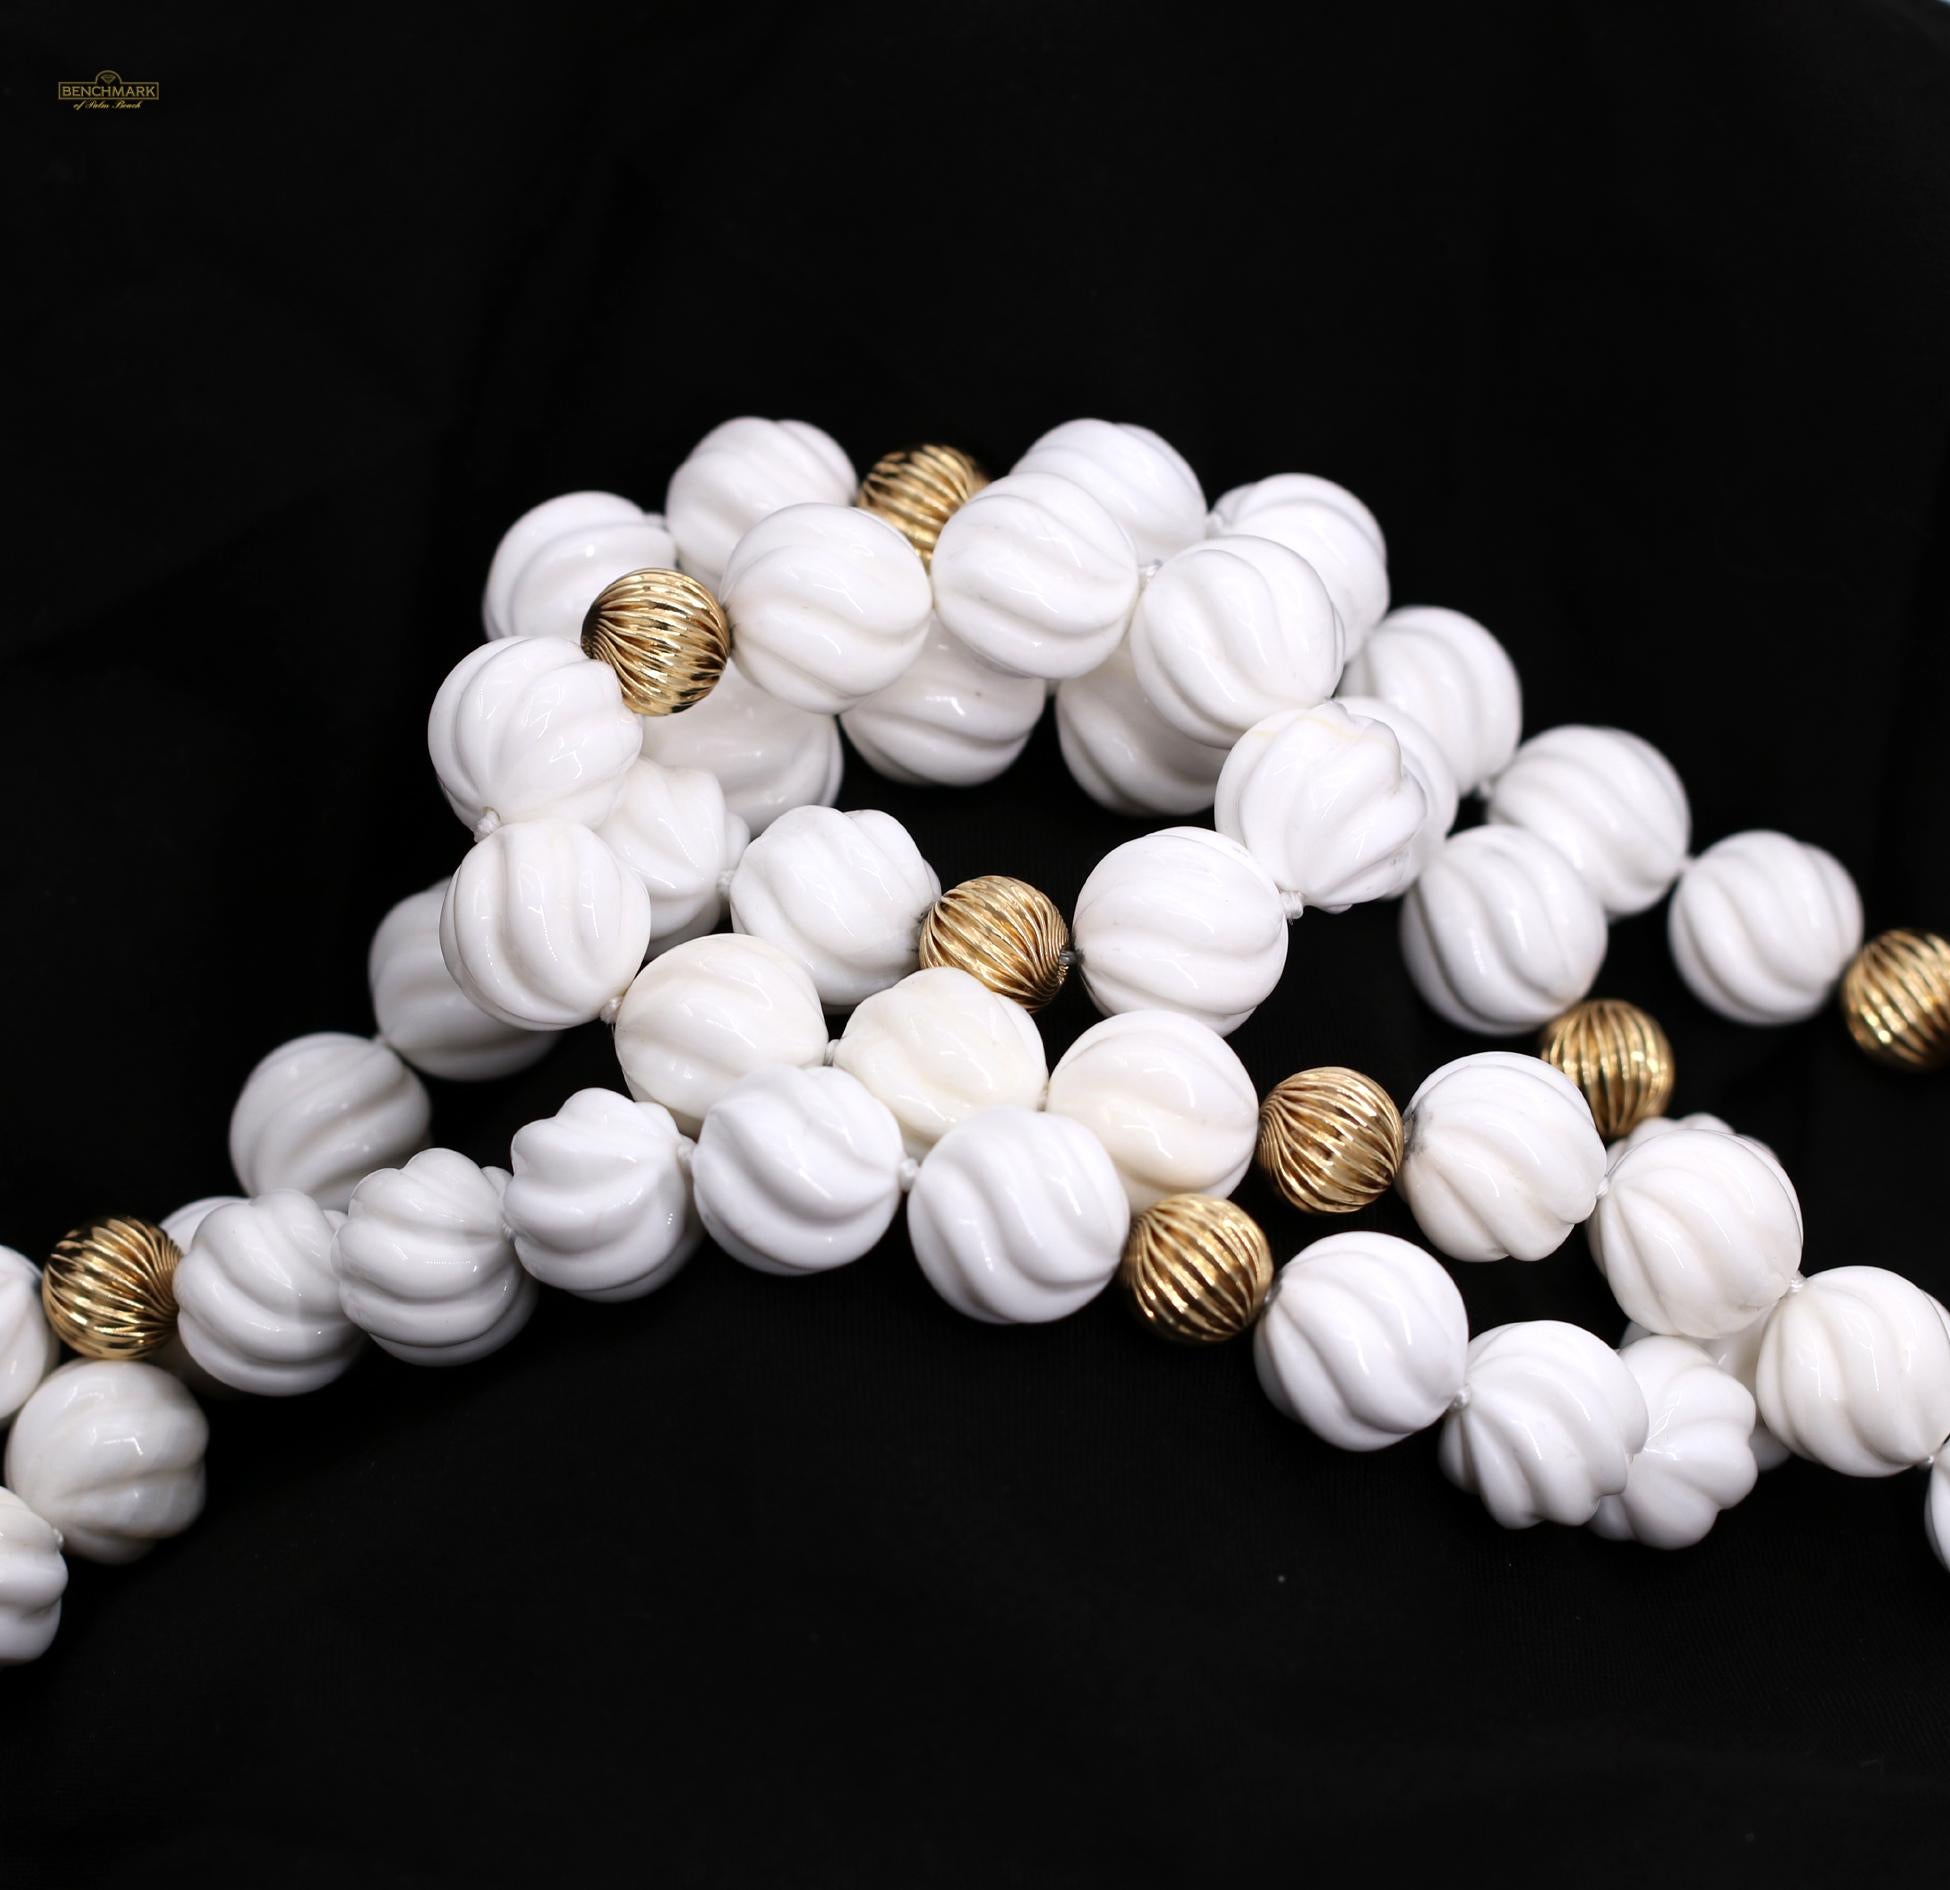 A set of necklaces, comprised of a pattern of 5 white spiral design shell beads, and a fluted 14K yellow gold bead. With one necklace measuring 18 1/2 inches, and the other measuring 22 inches, there are a variety of ways with which it can be worn.